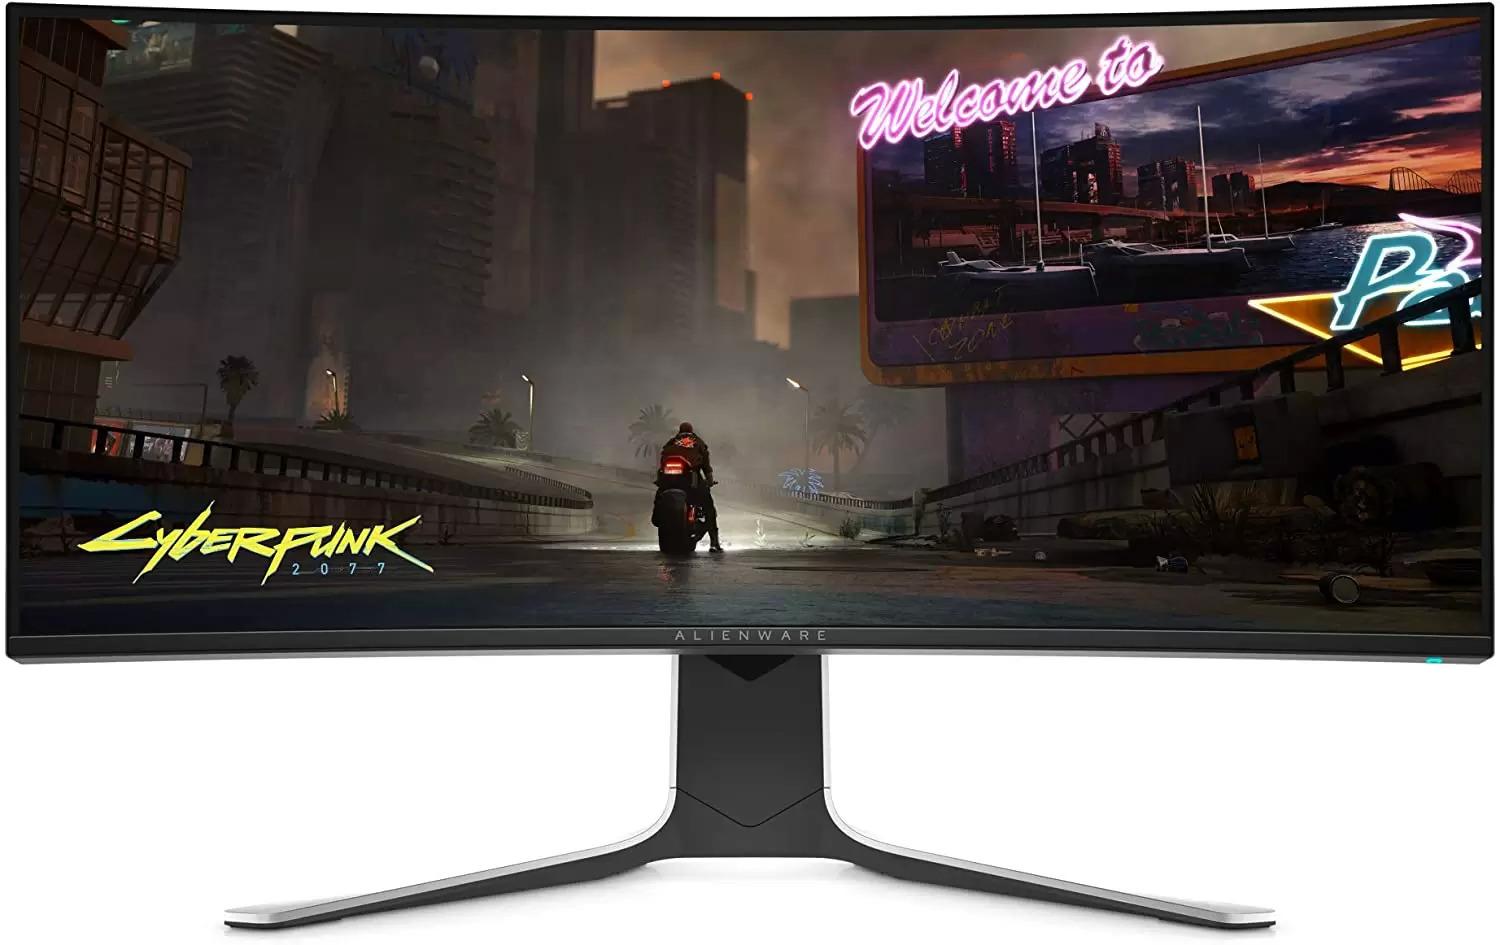 34in Alienware AW3420DW Curved IPS G-Sync Gaming Monitor for $579.98 Shipped